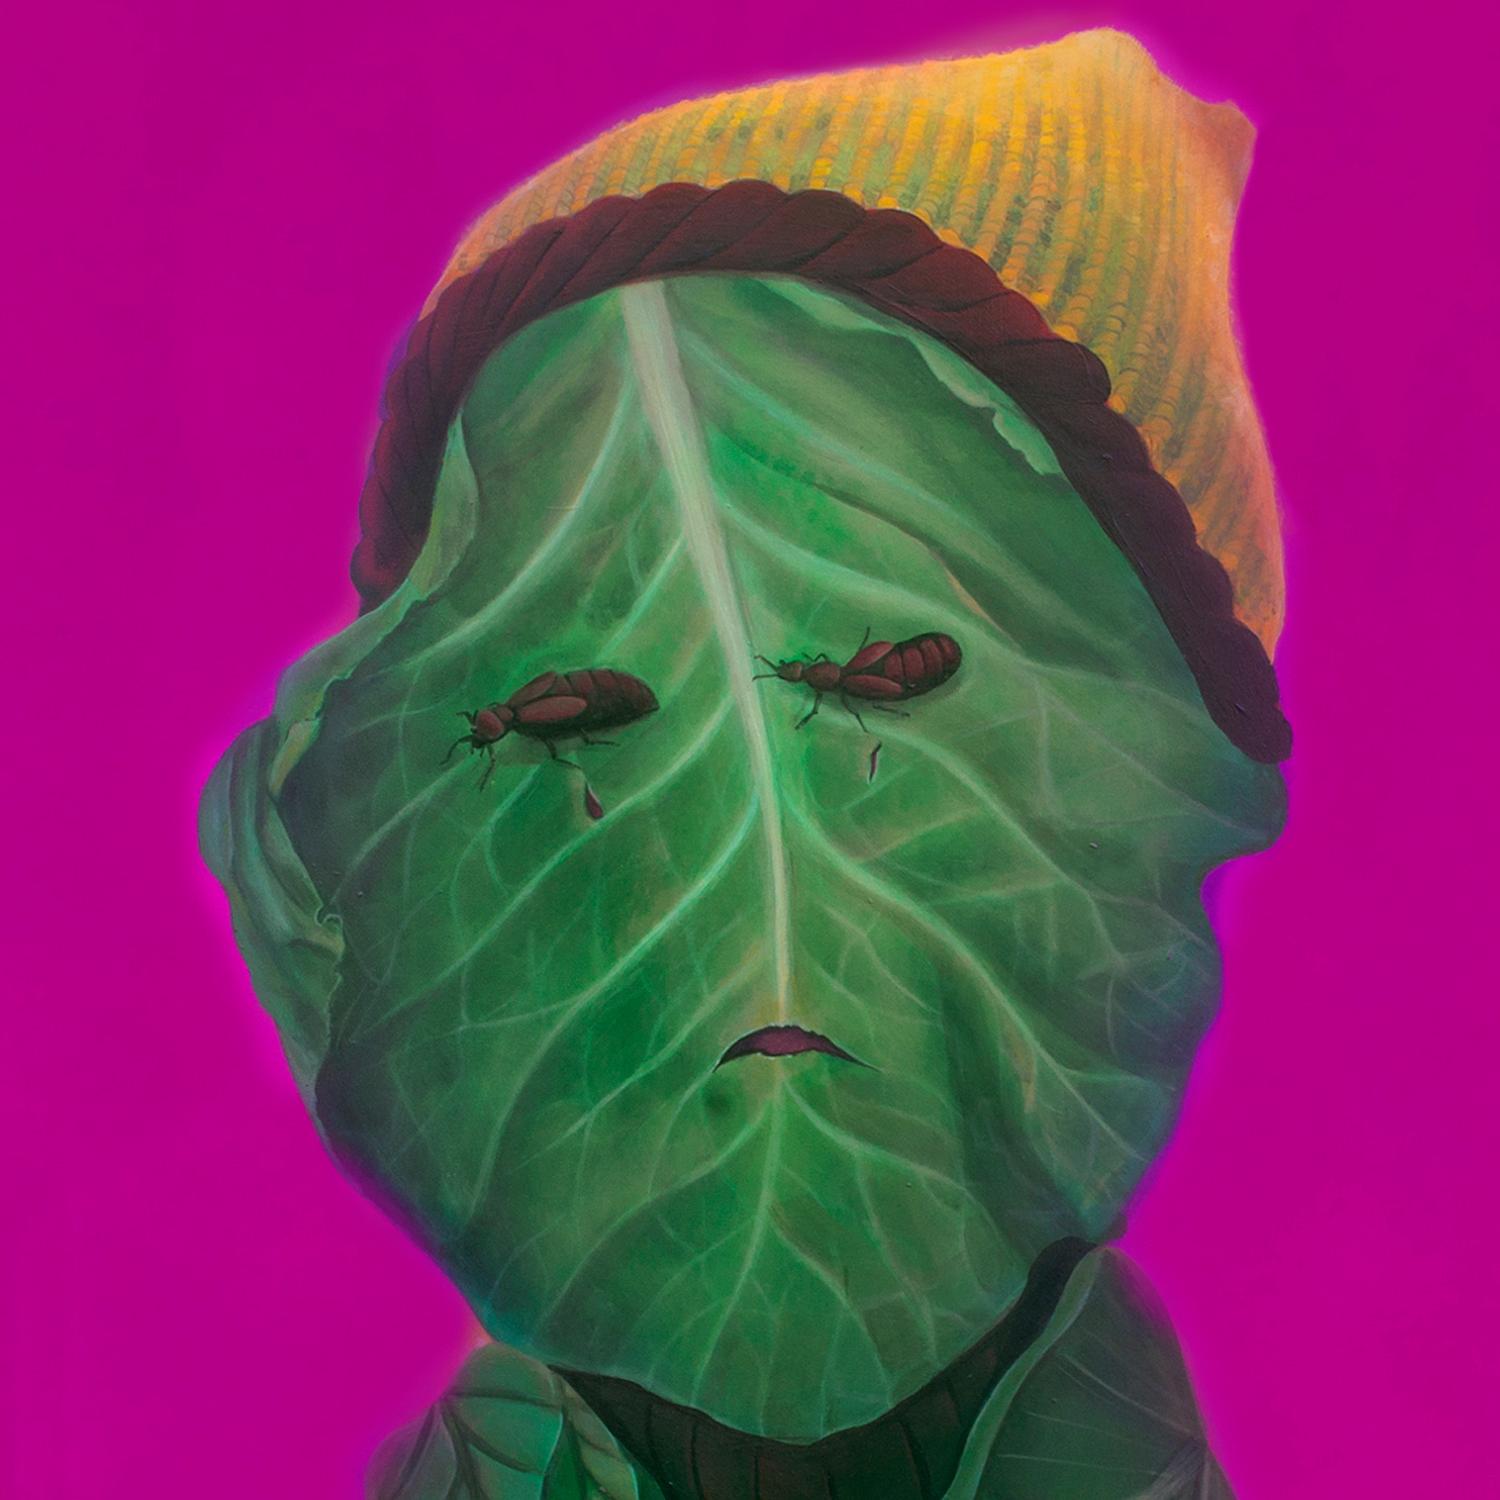 Contemporary Pop Surrealist Portrait. Cabbage Face with a Yellow  Hat - Painting by Natasha Lelenco